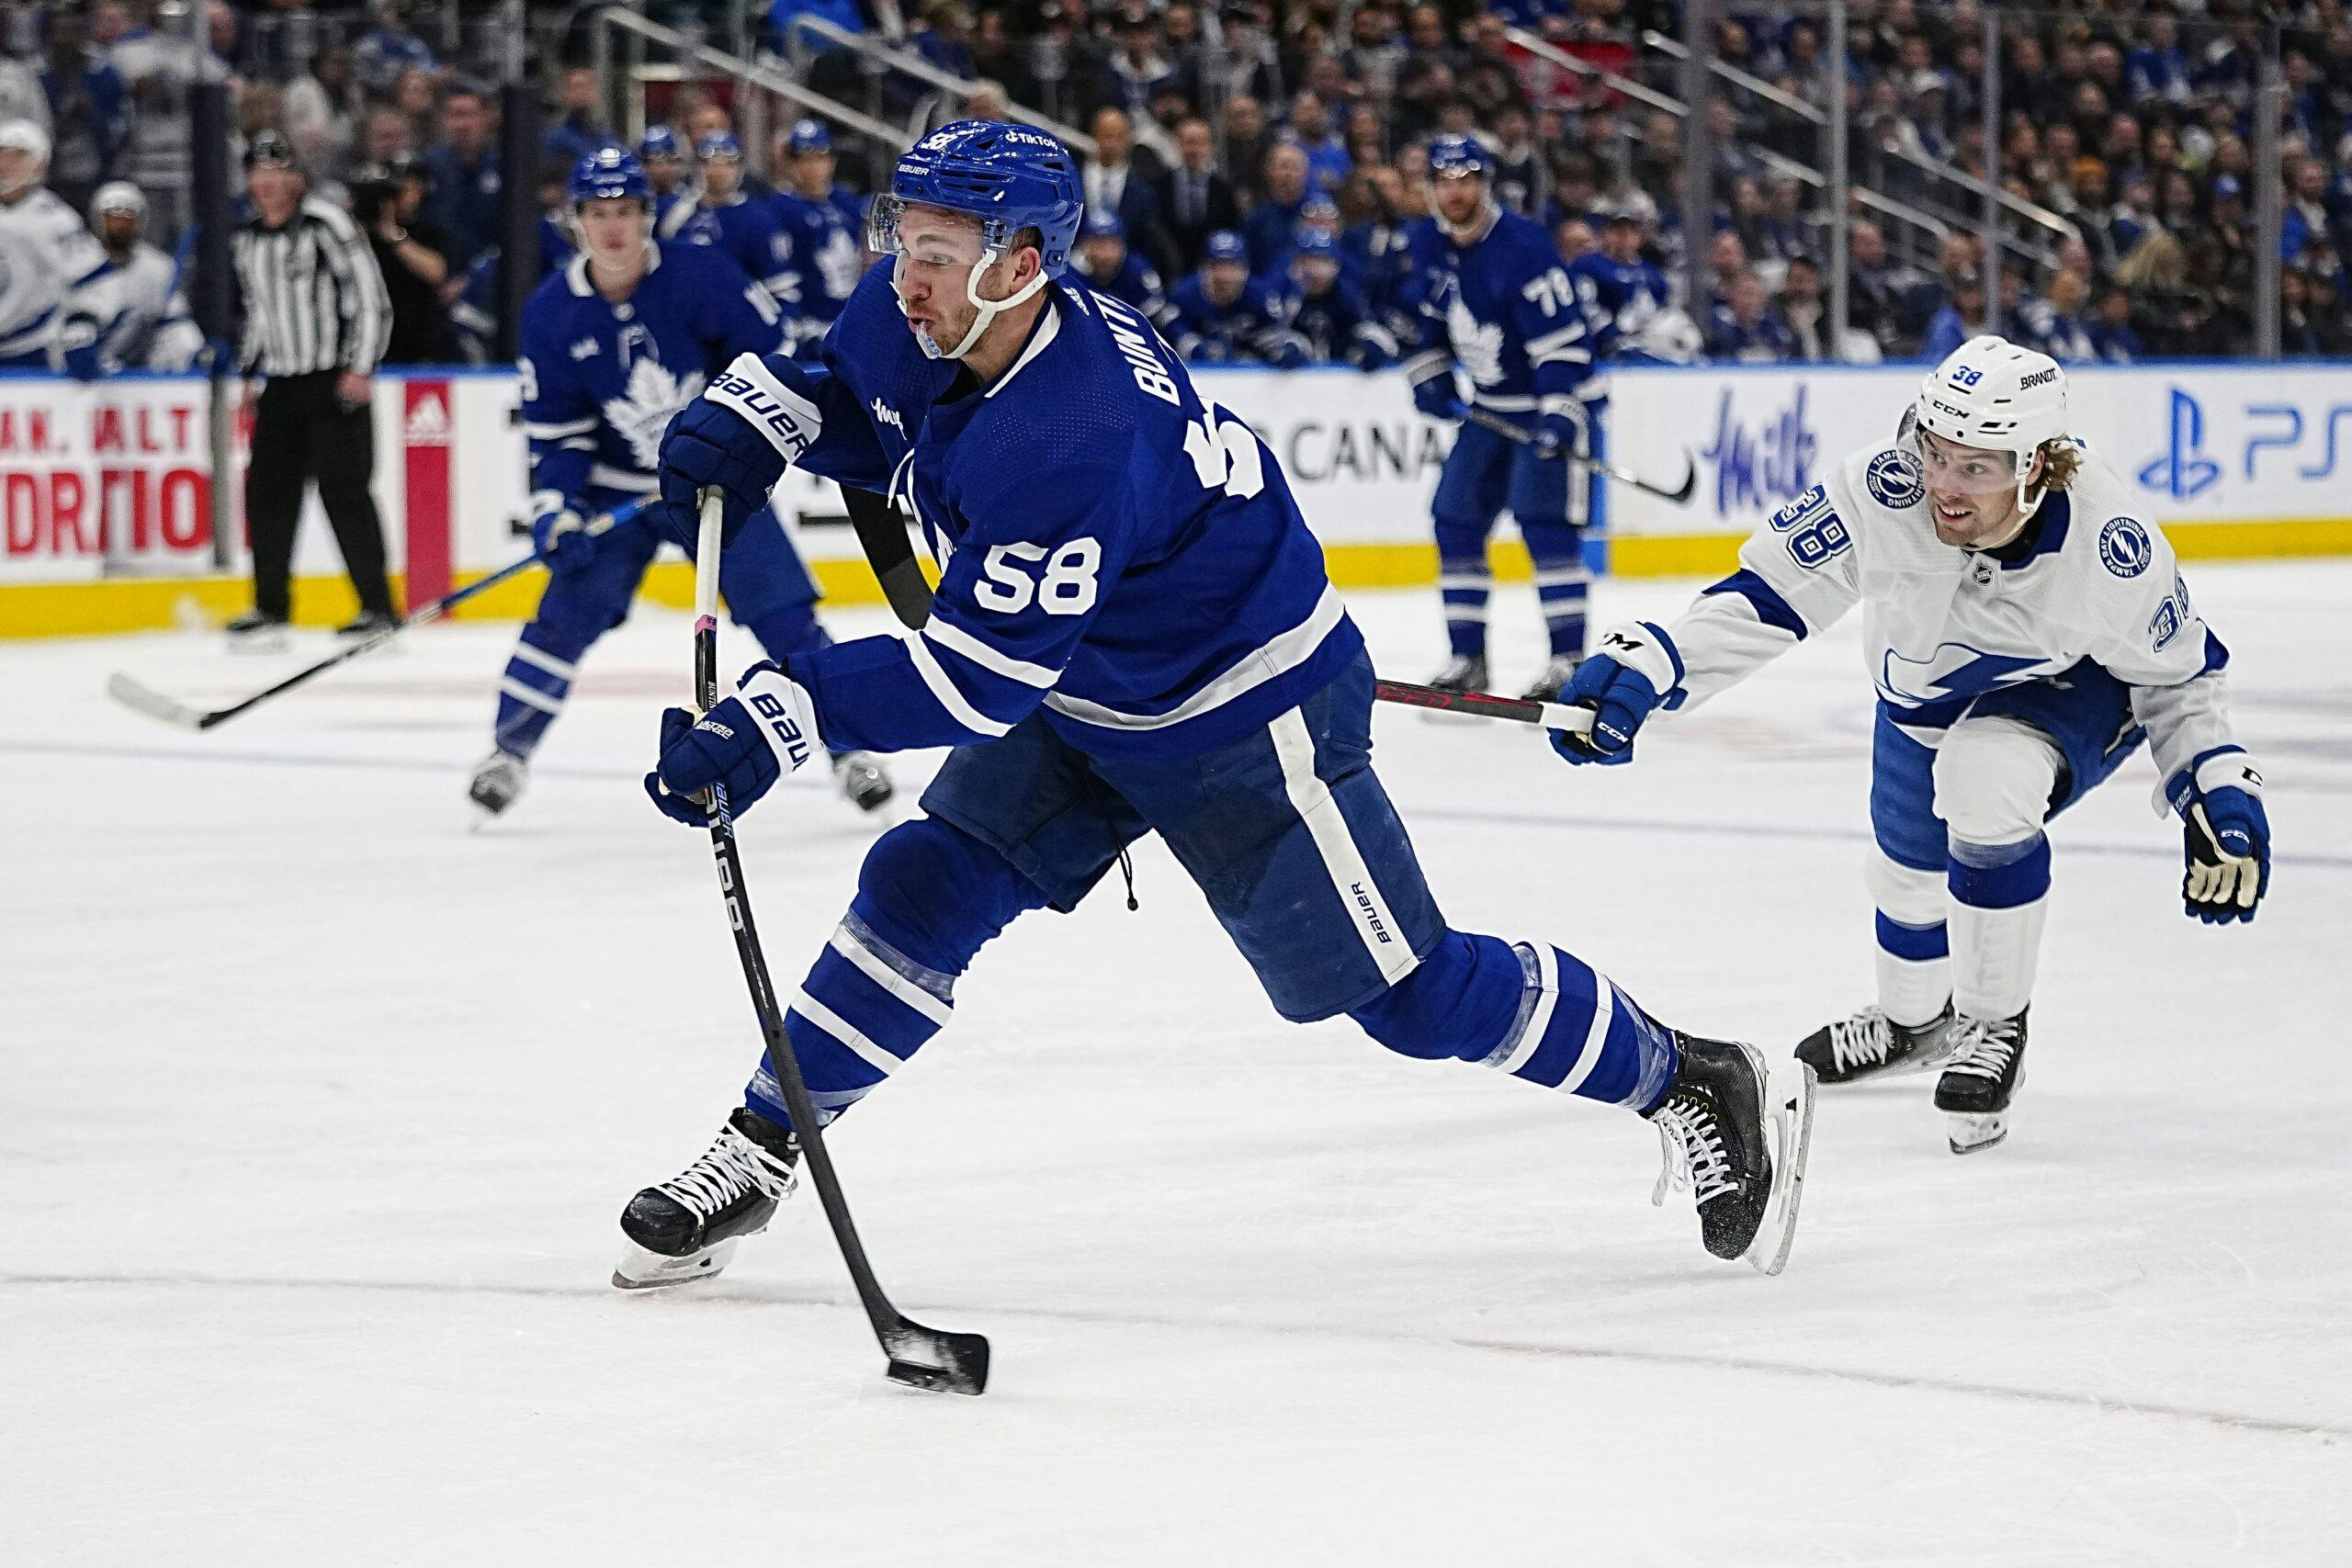 Maple Leafs' Bunting suspended 3 games for illegal check to head